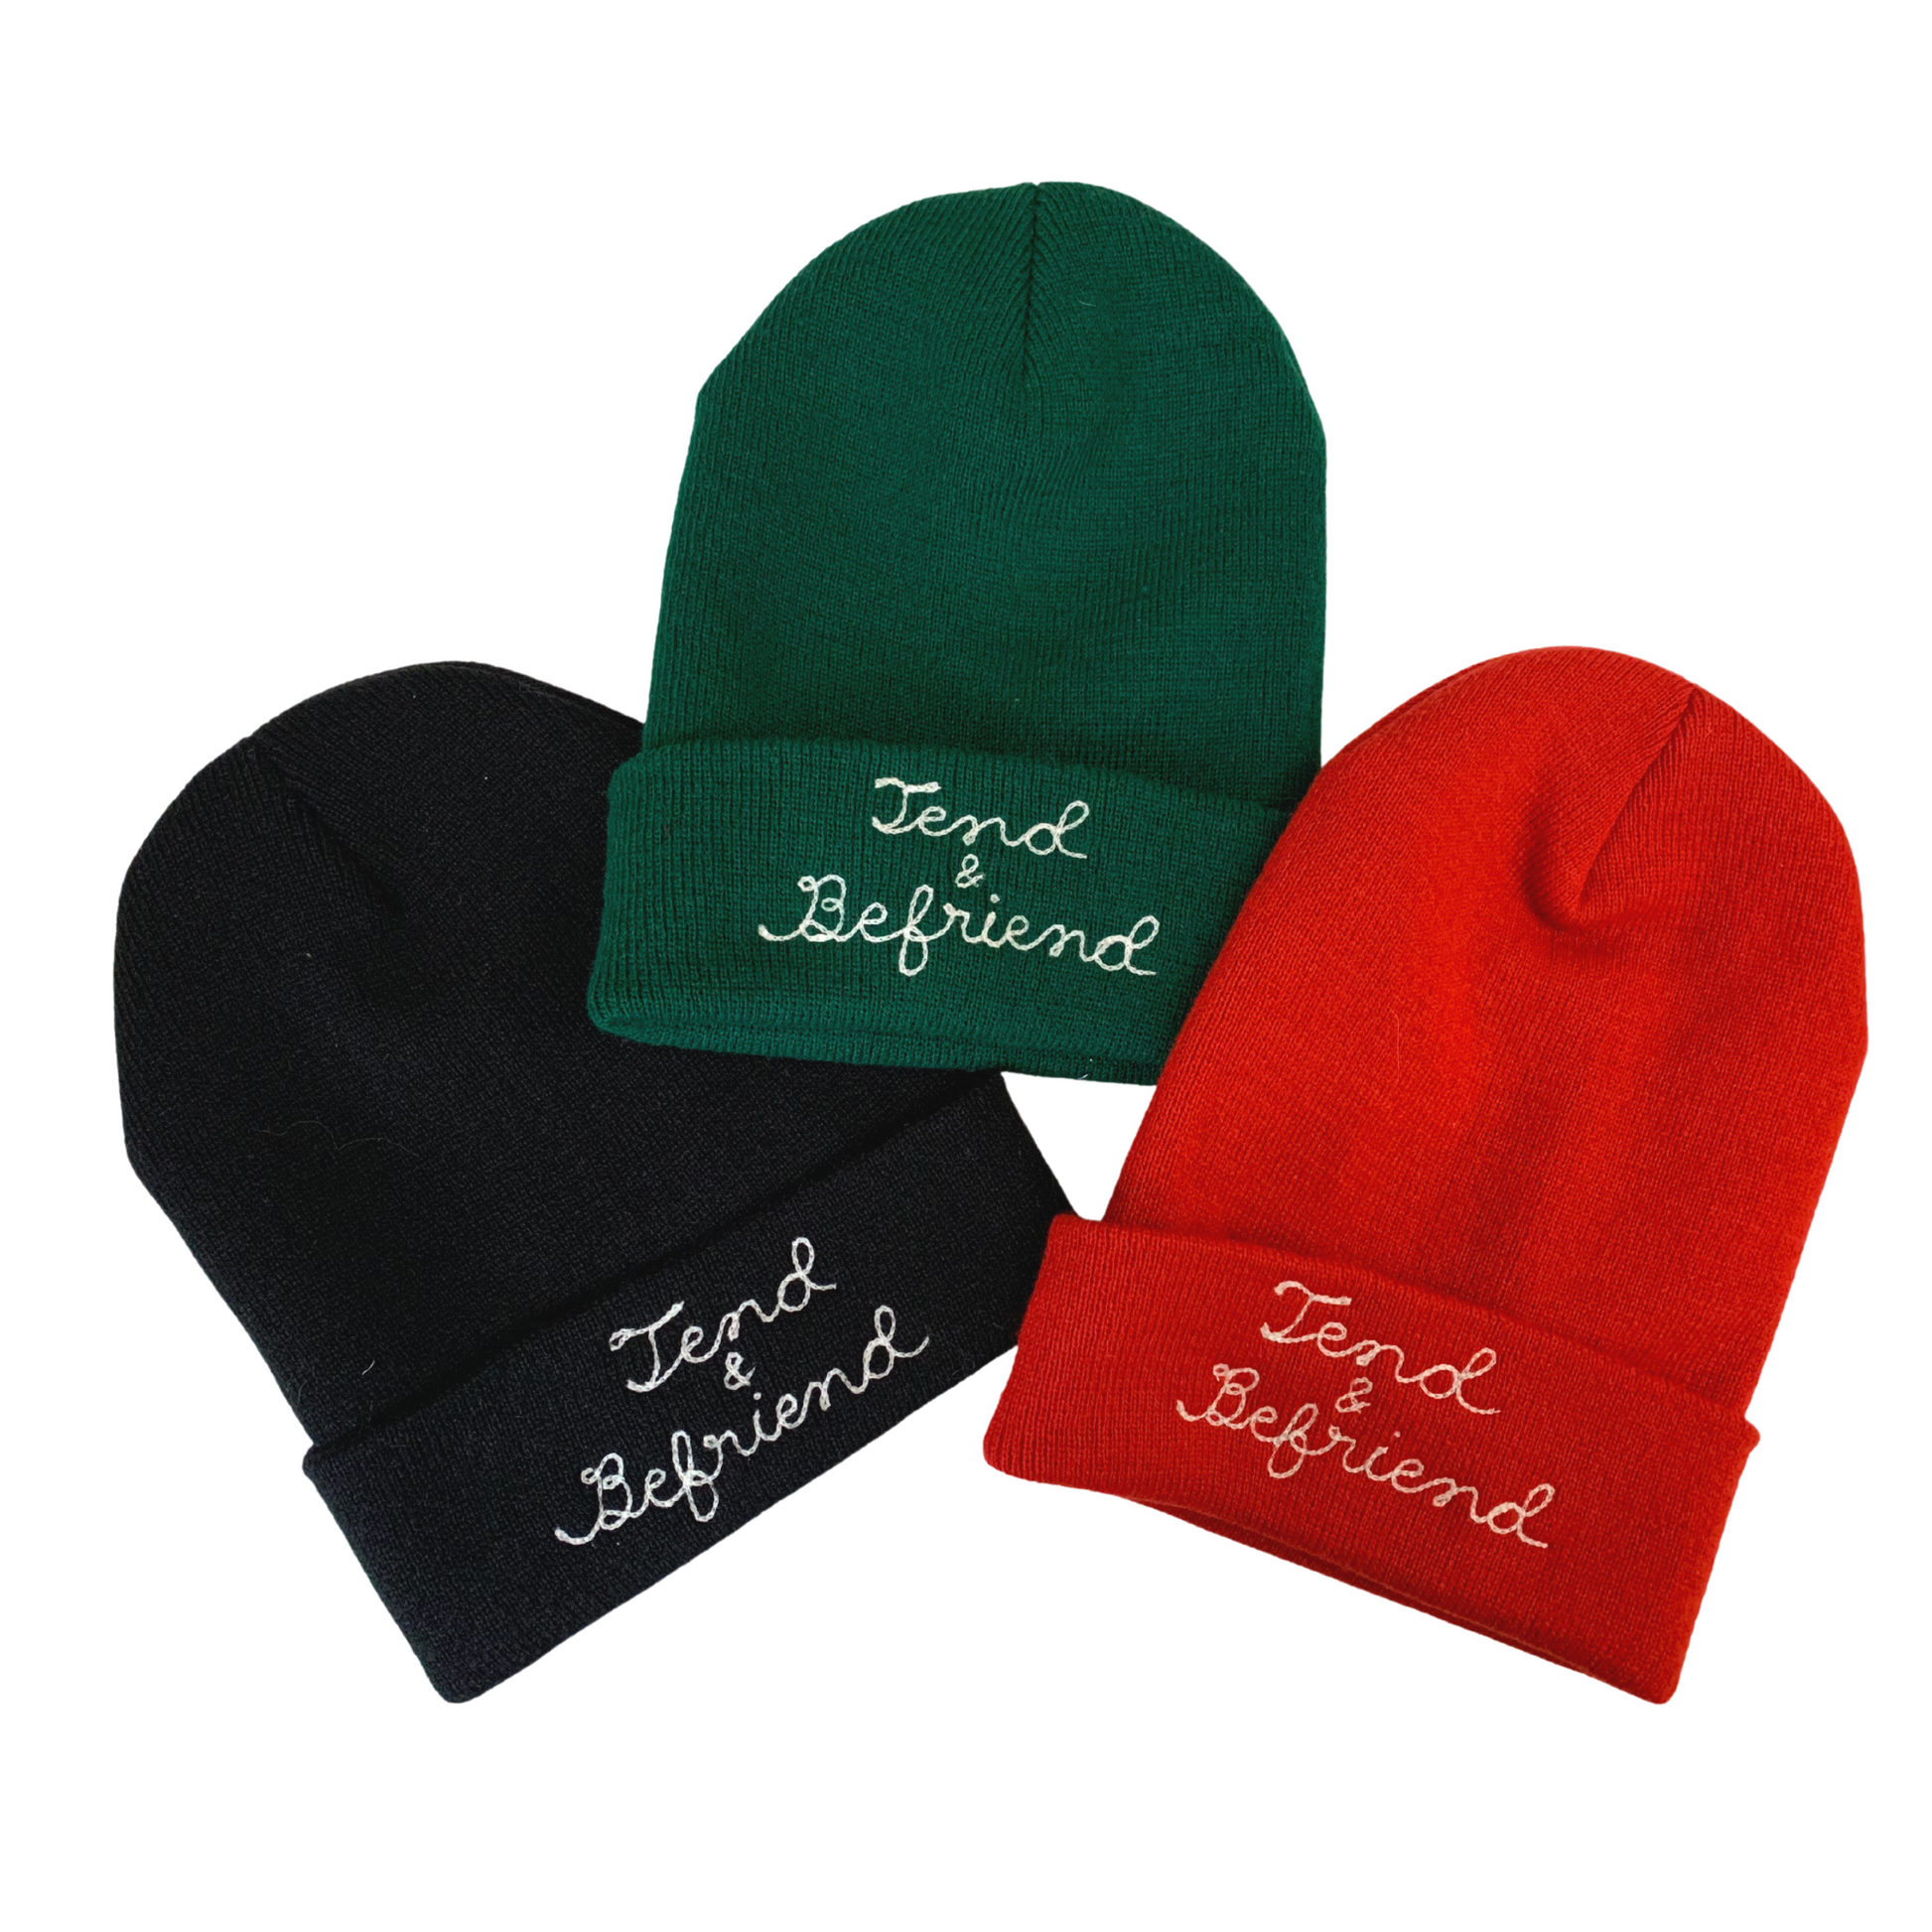 Custom Beanies: Design Your Own Embroidered Beanies